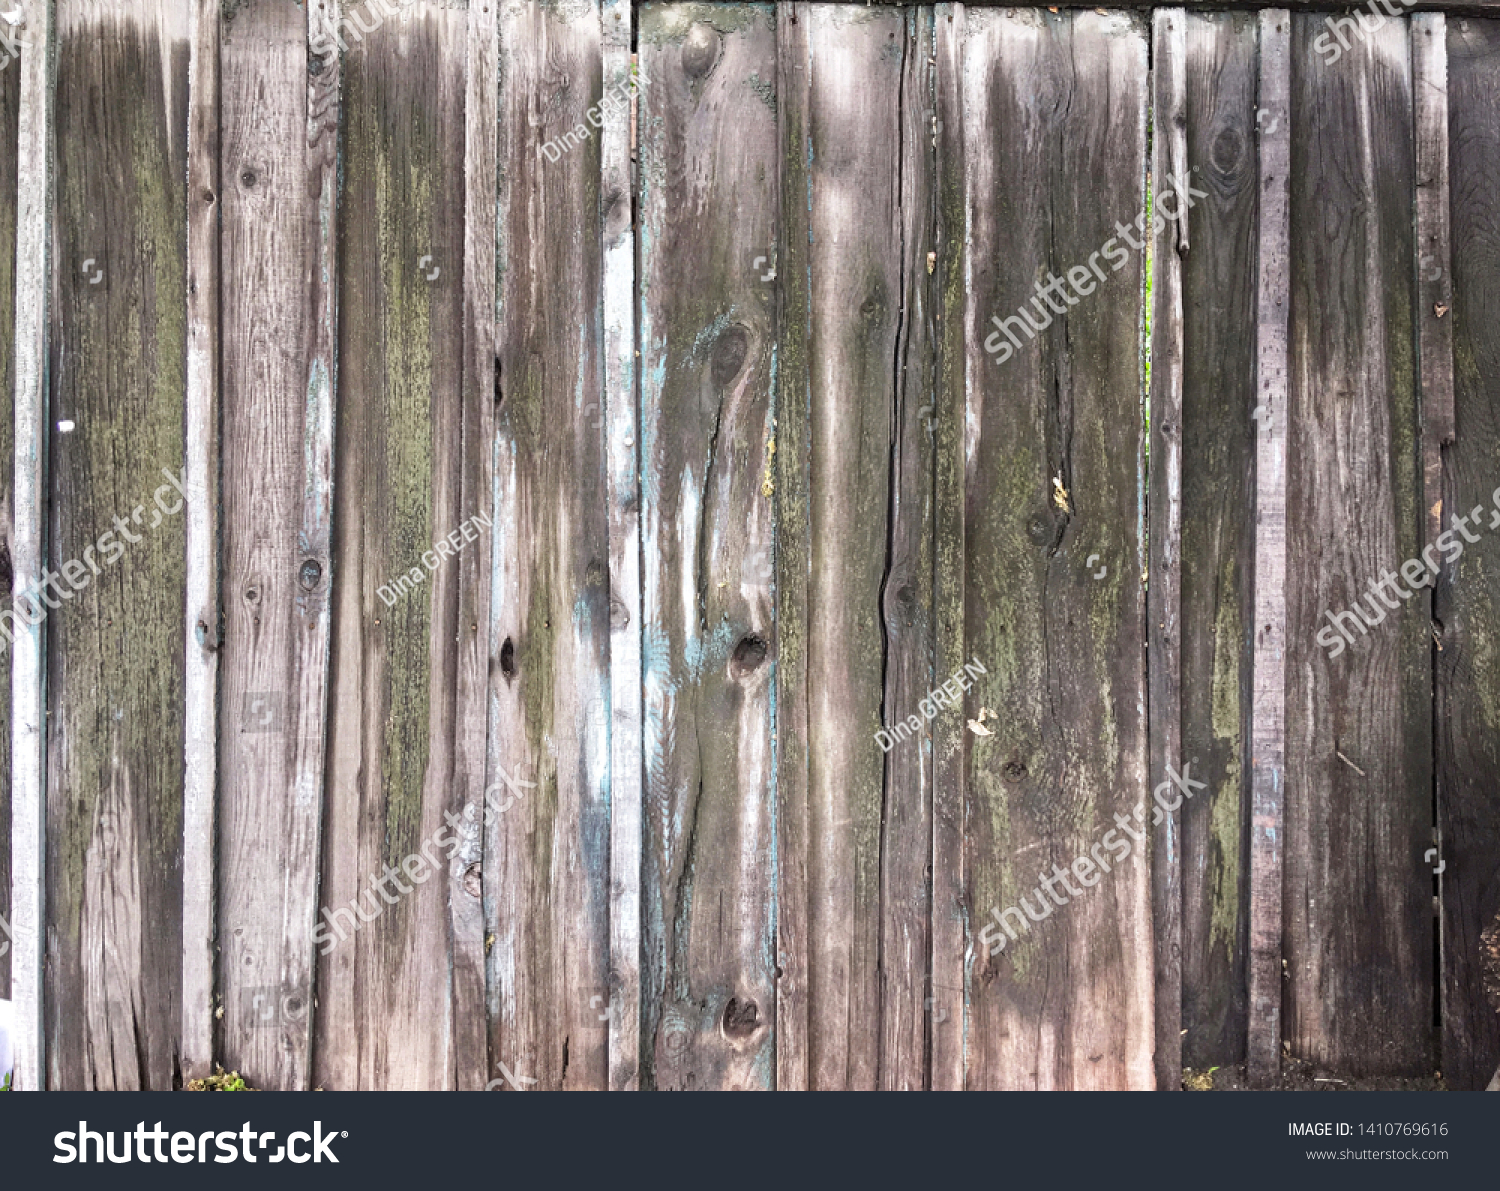 Download Wooden Fence Texture Old Style Background Stock Photo Edit Now 1410769616